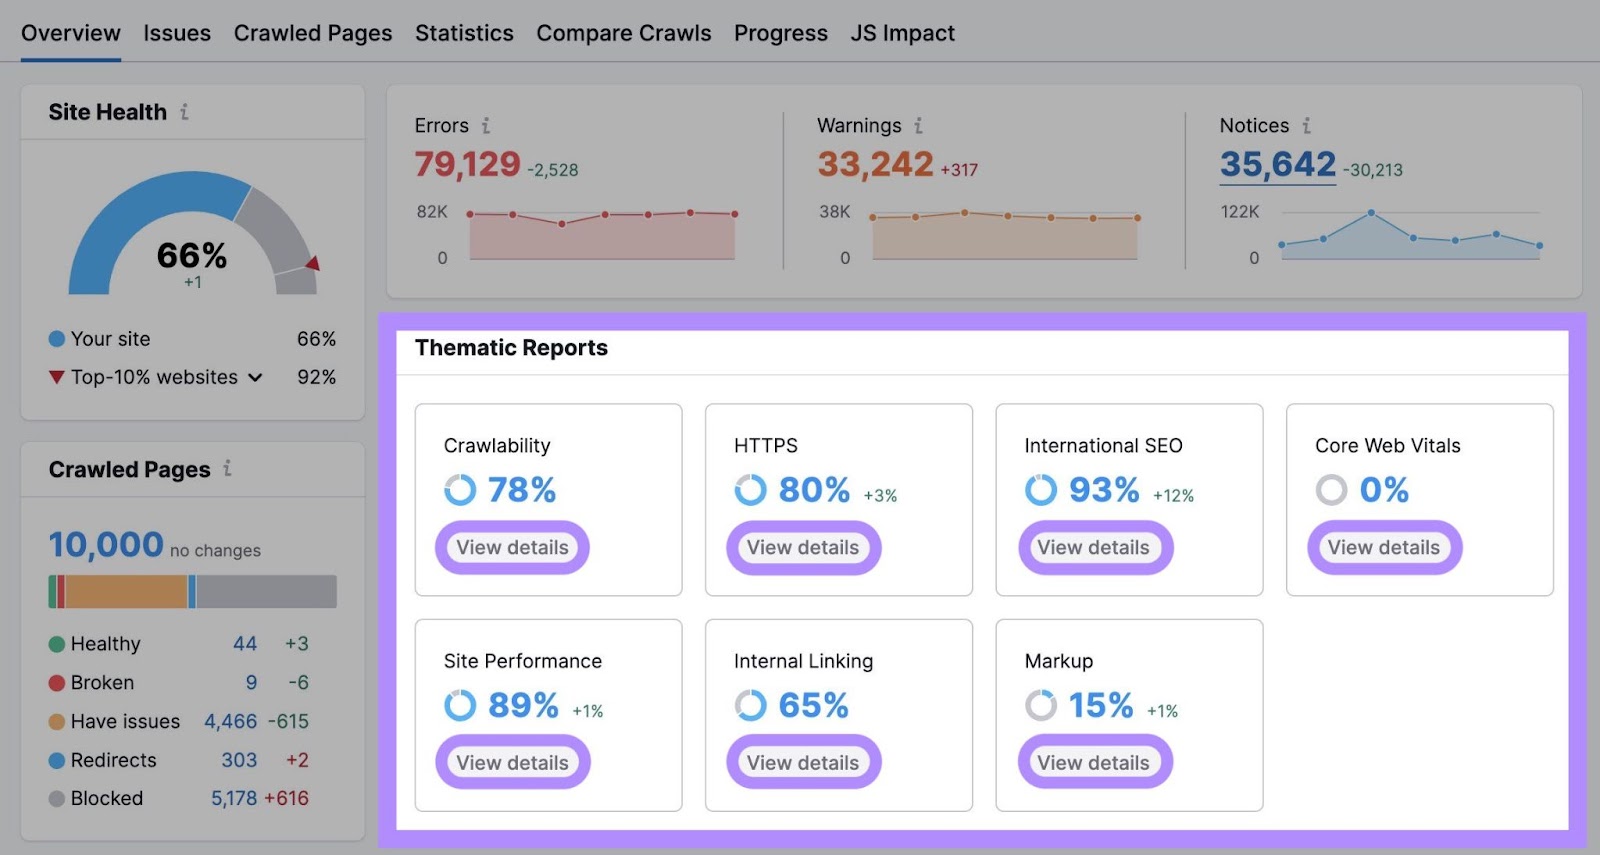 Crawlability, HTTPS, International SEO, Core Web Vitals, Site Performance, Internal Linking, and Markup widgets highlighted under "Thematic Reports" section